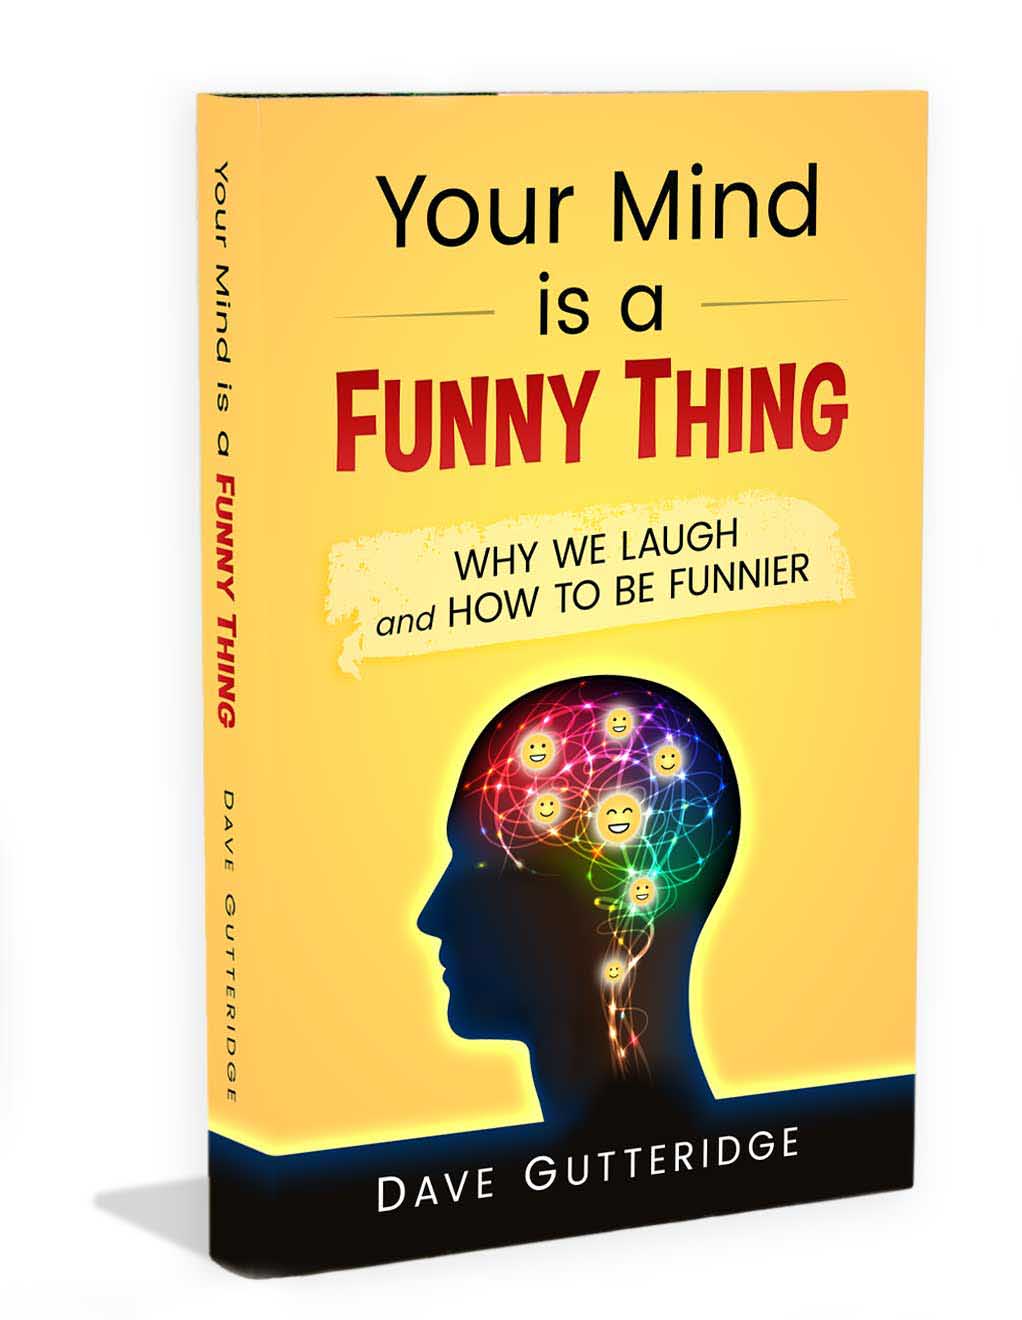 My book about how humor works in the human brain.